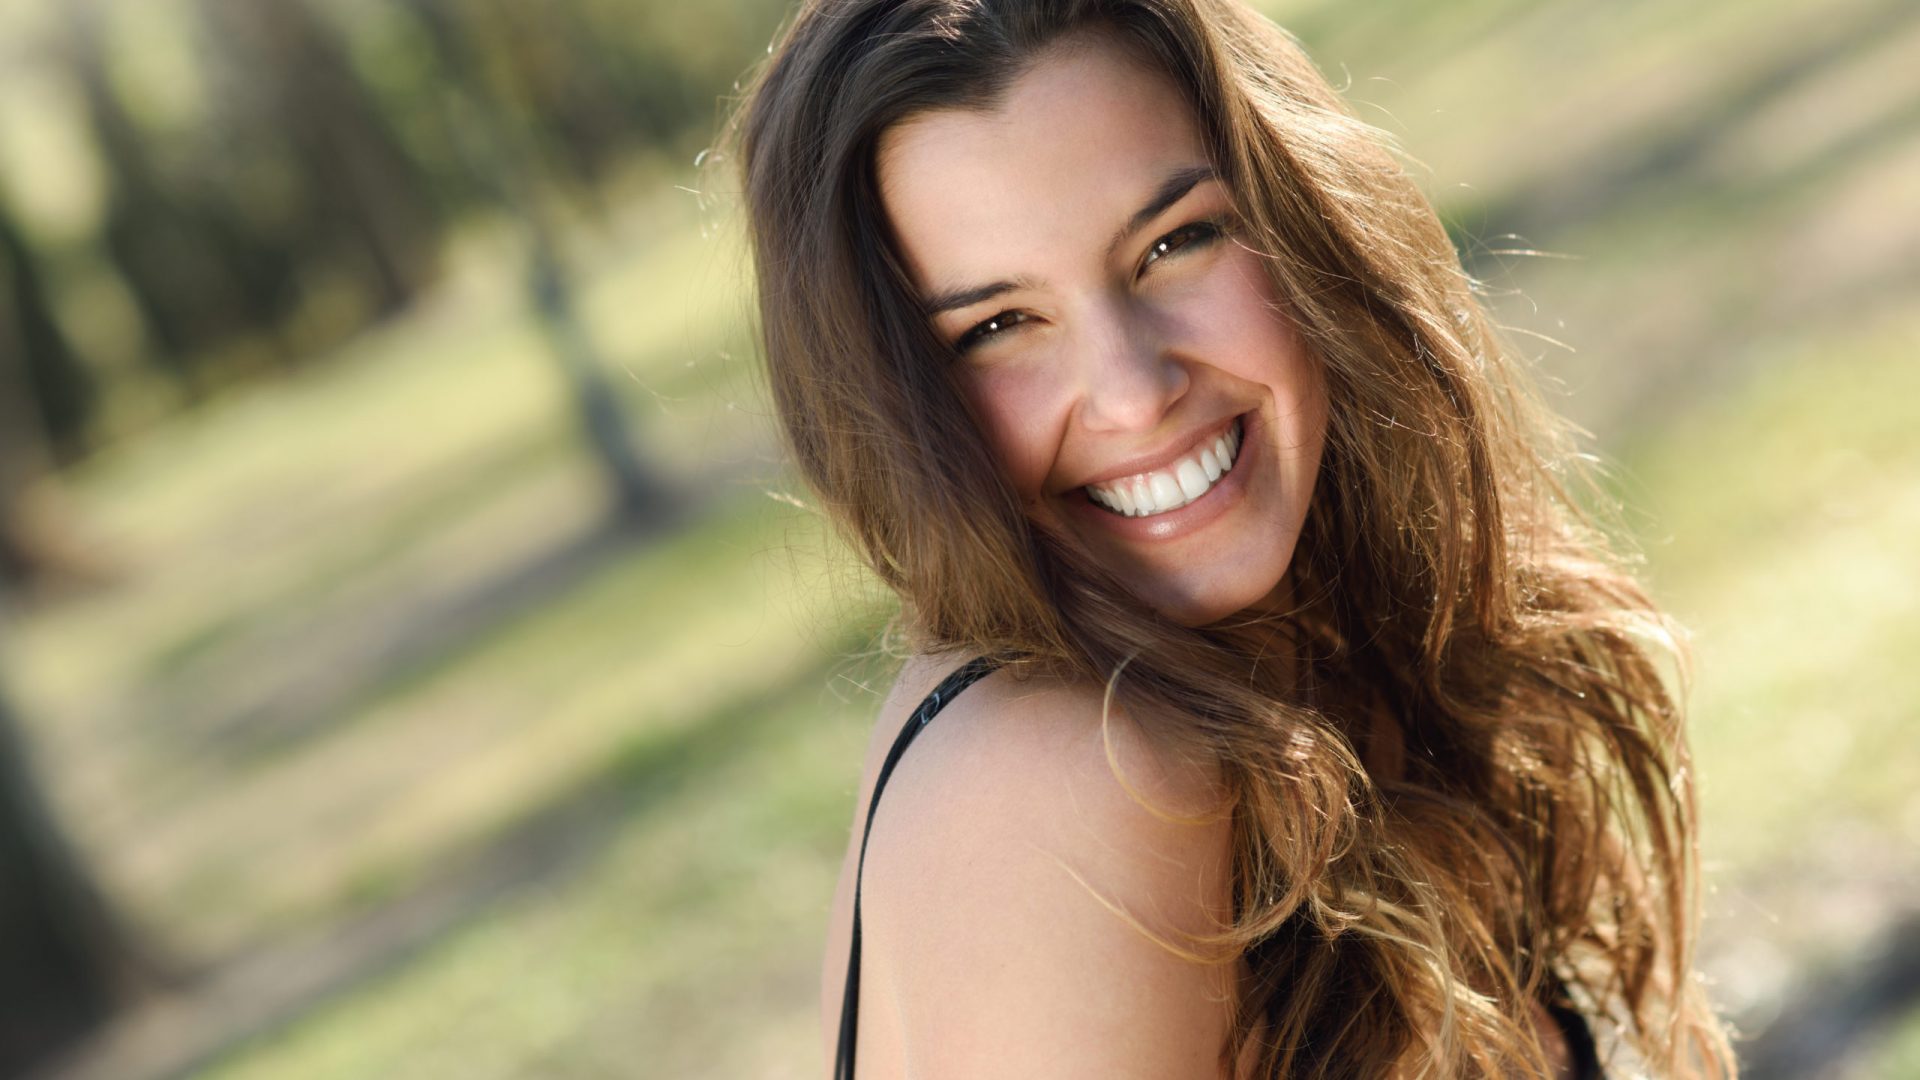 Close-up of a beautiful woman smiling in a urban park